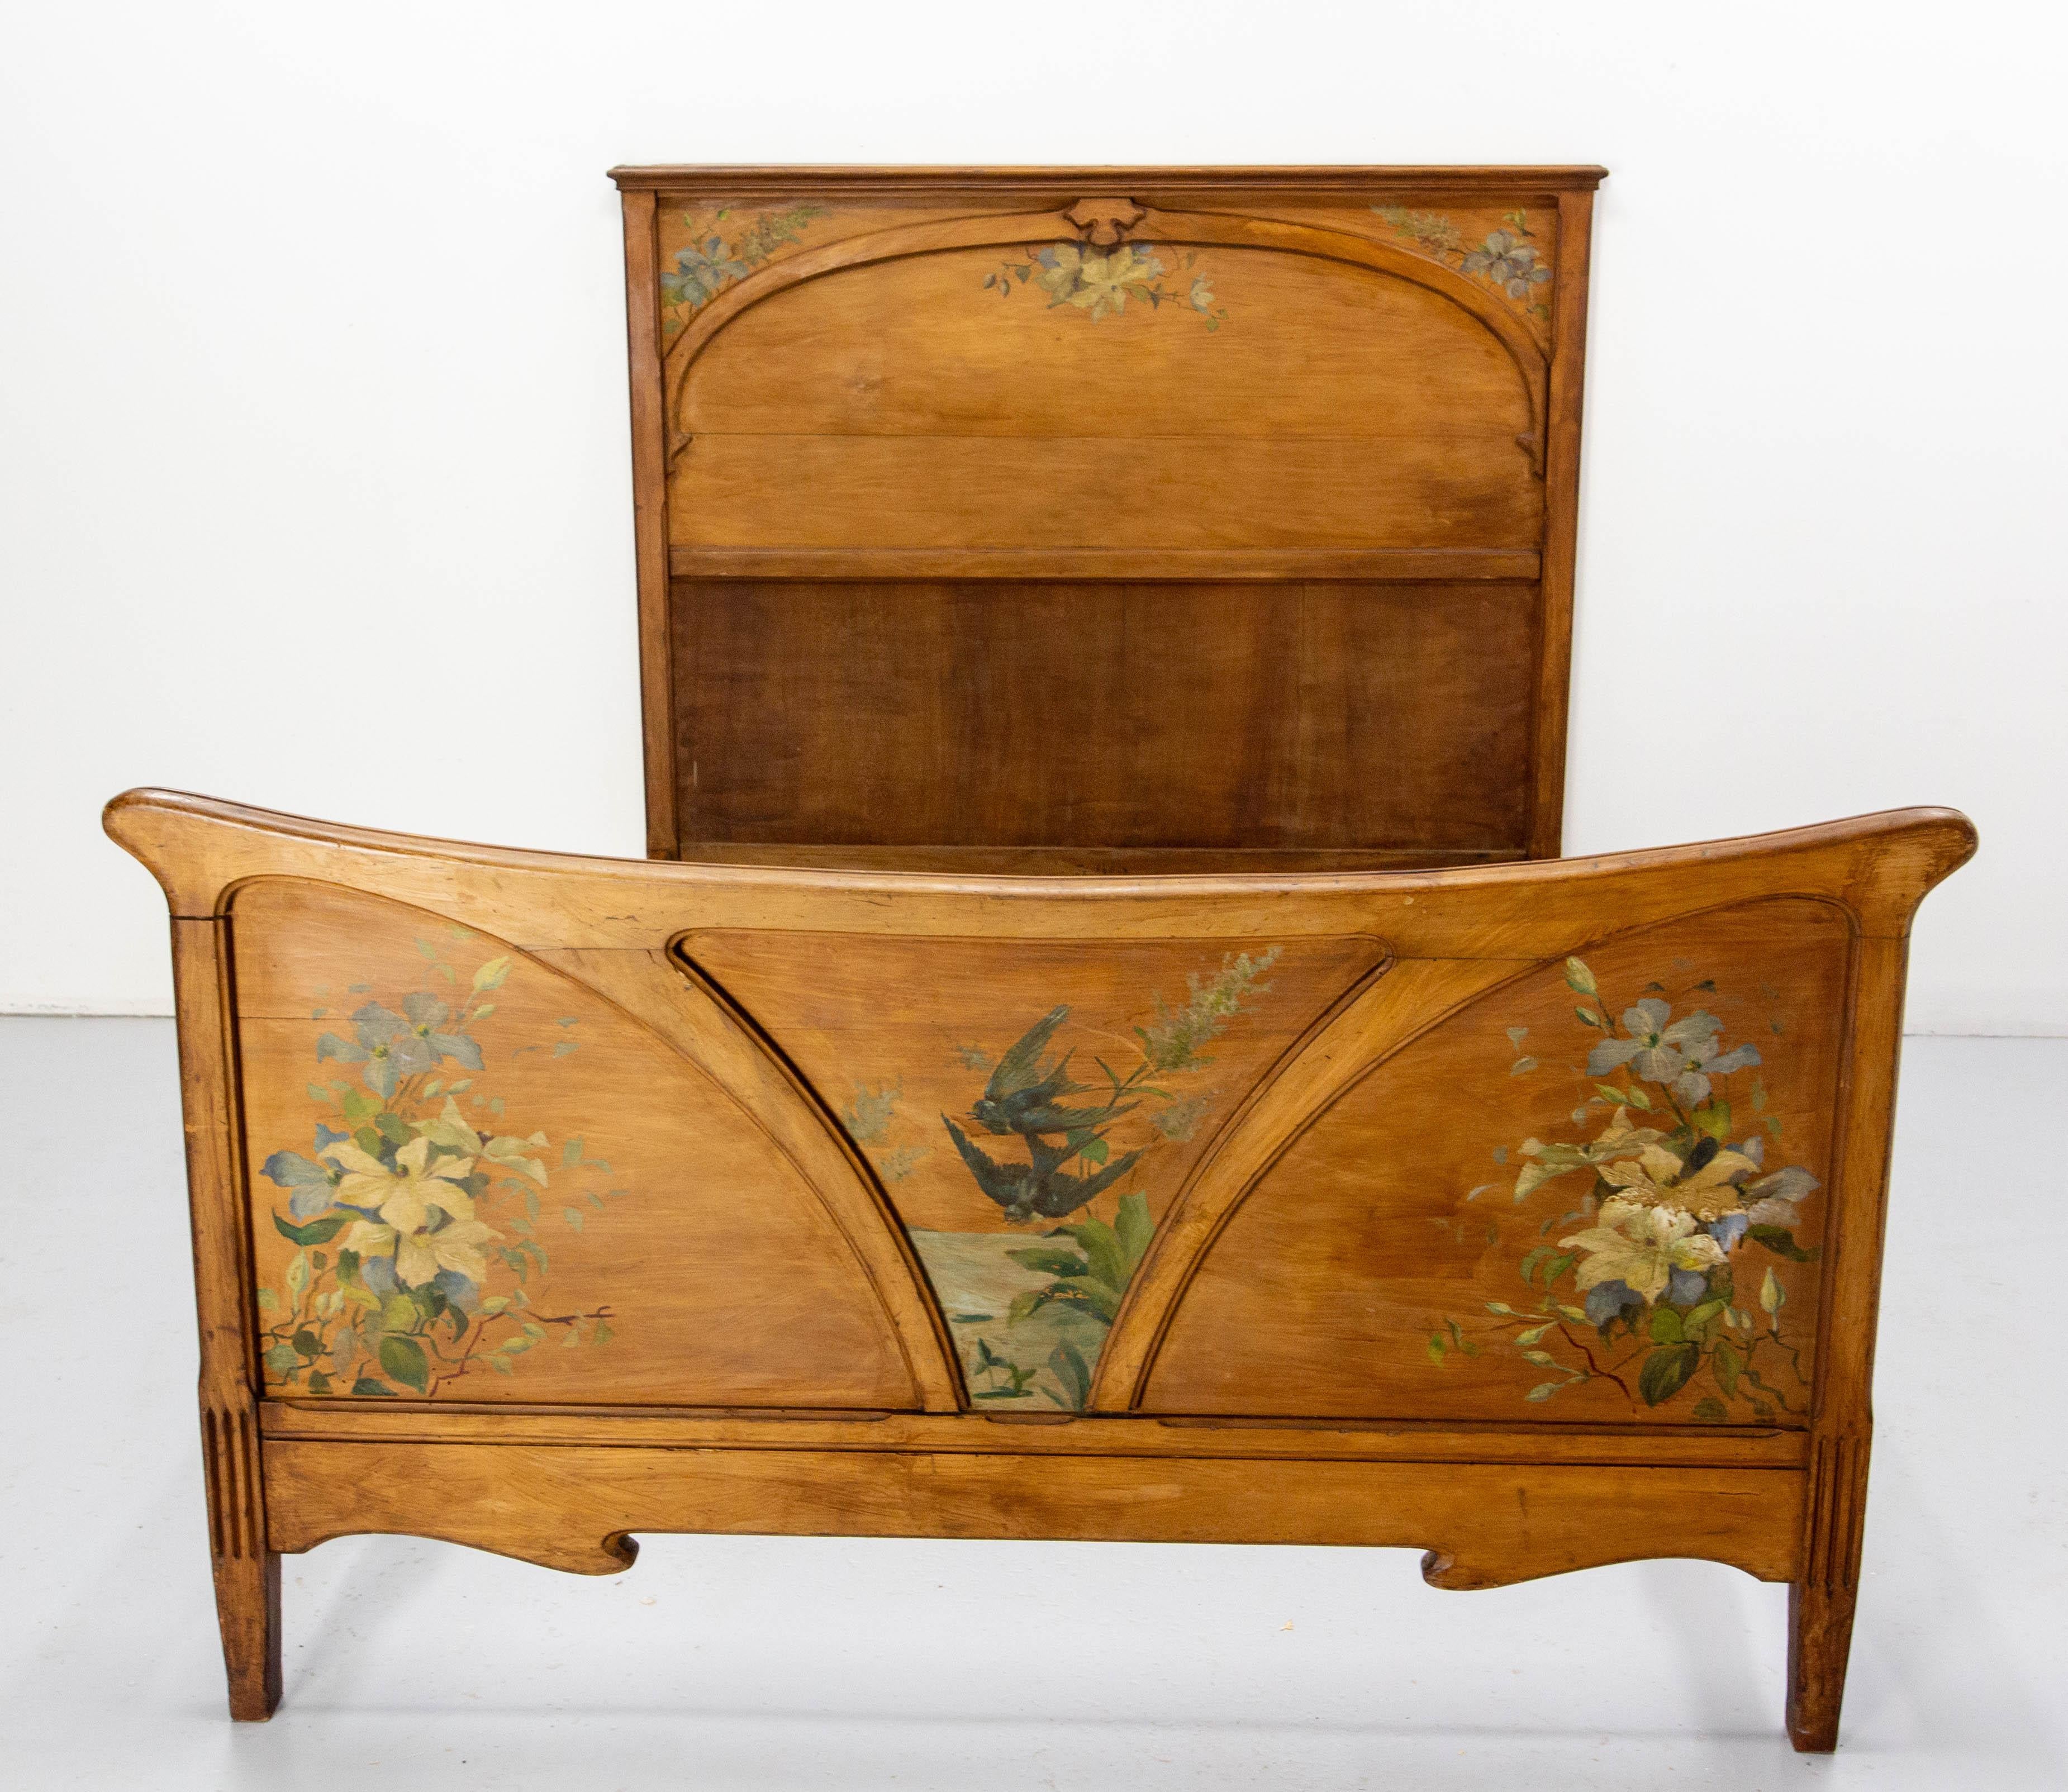 French bed made circa 1890, in the art nouveau period. The motives inspirated of nature and the finishing are the original. They were hand-painted.
Very characterful
The full-size bedding can be placed on the bed's side rails. 
Interior dimensions